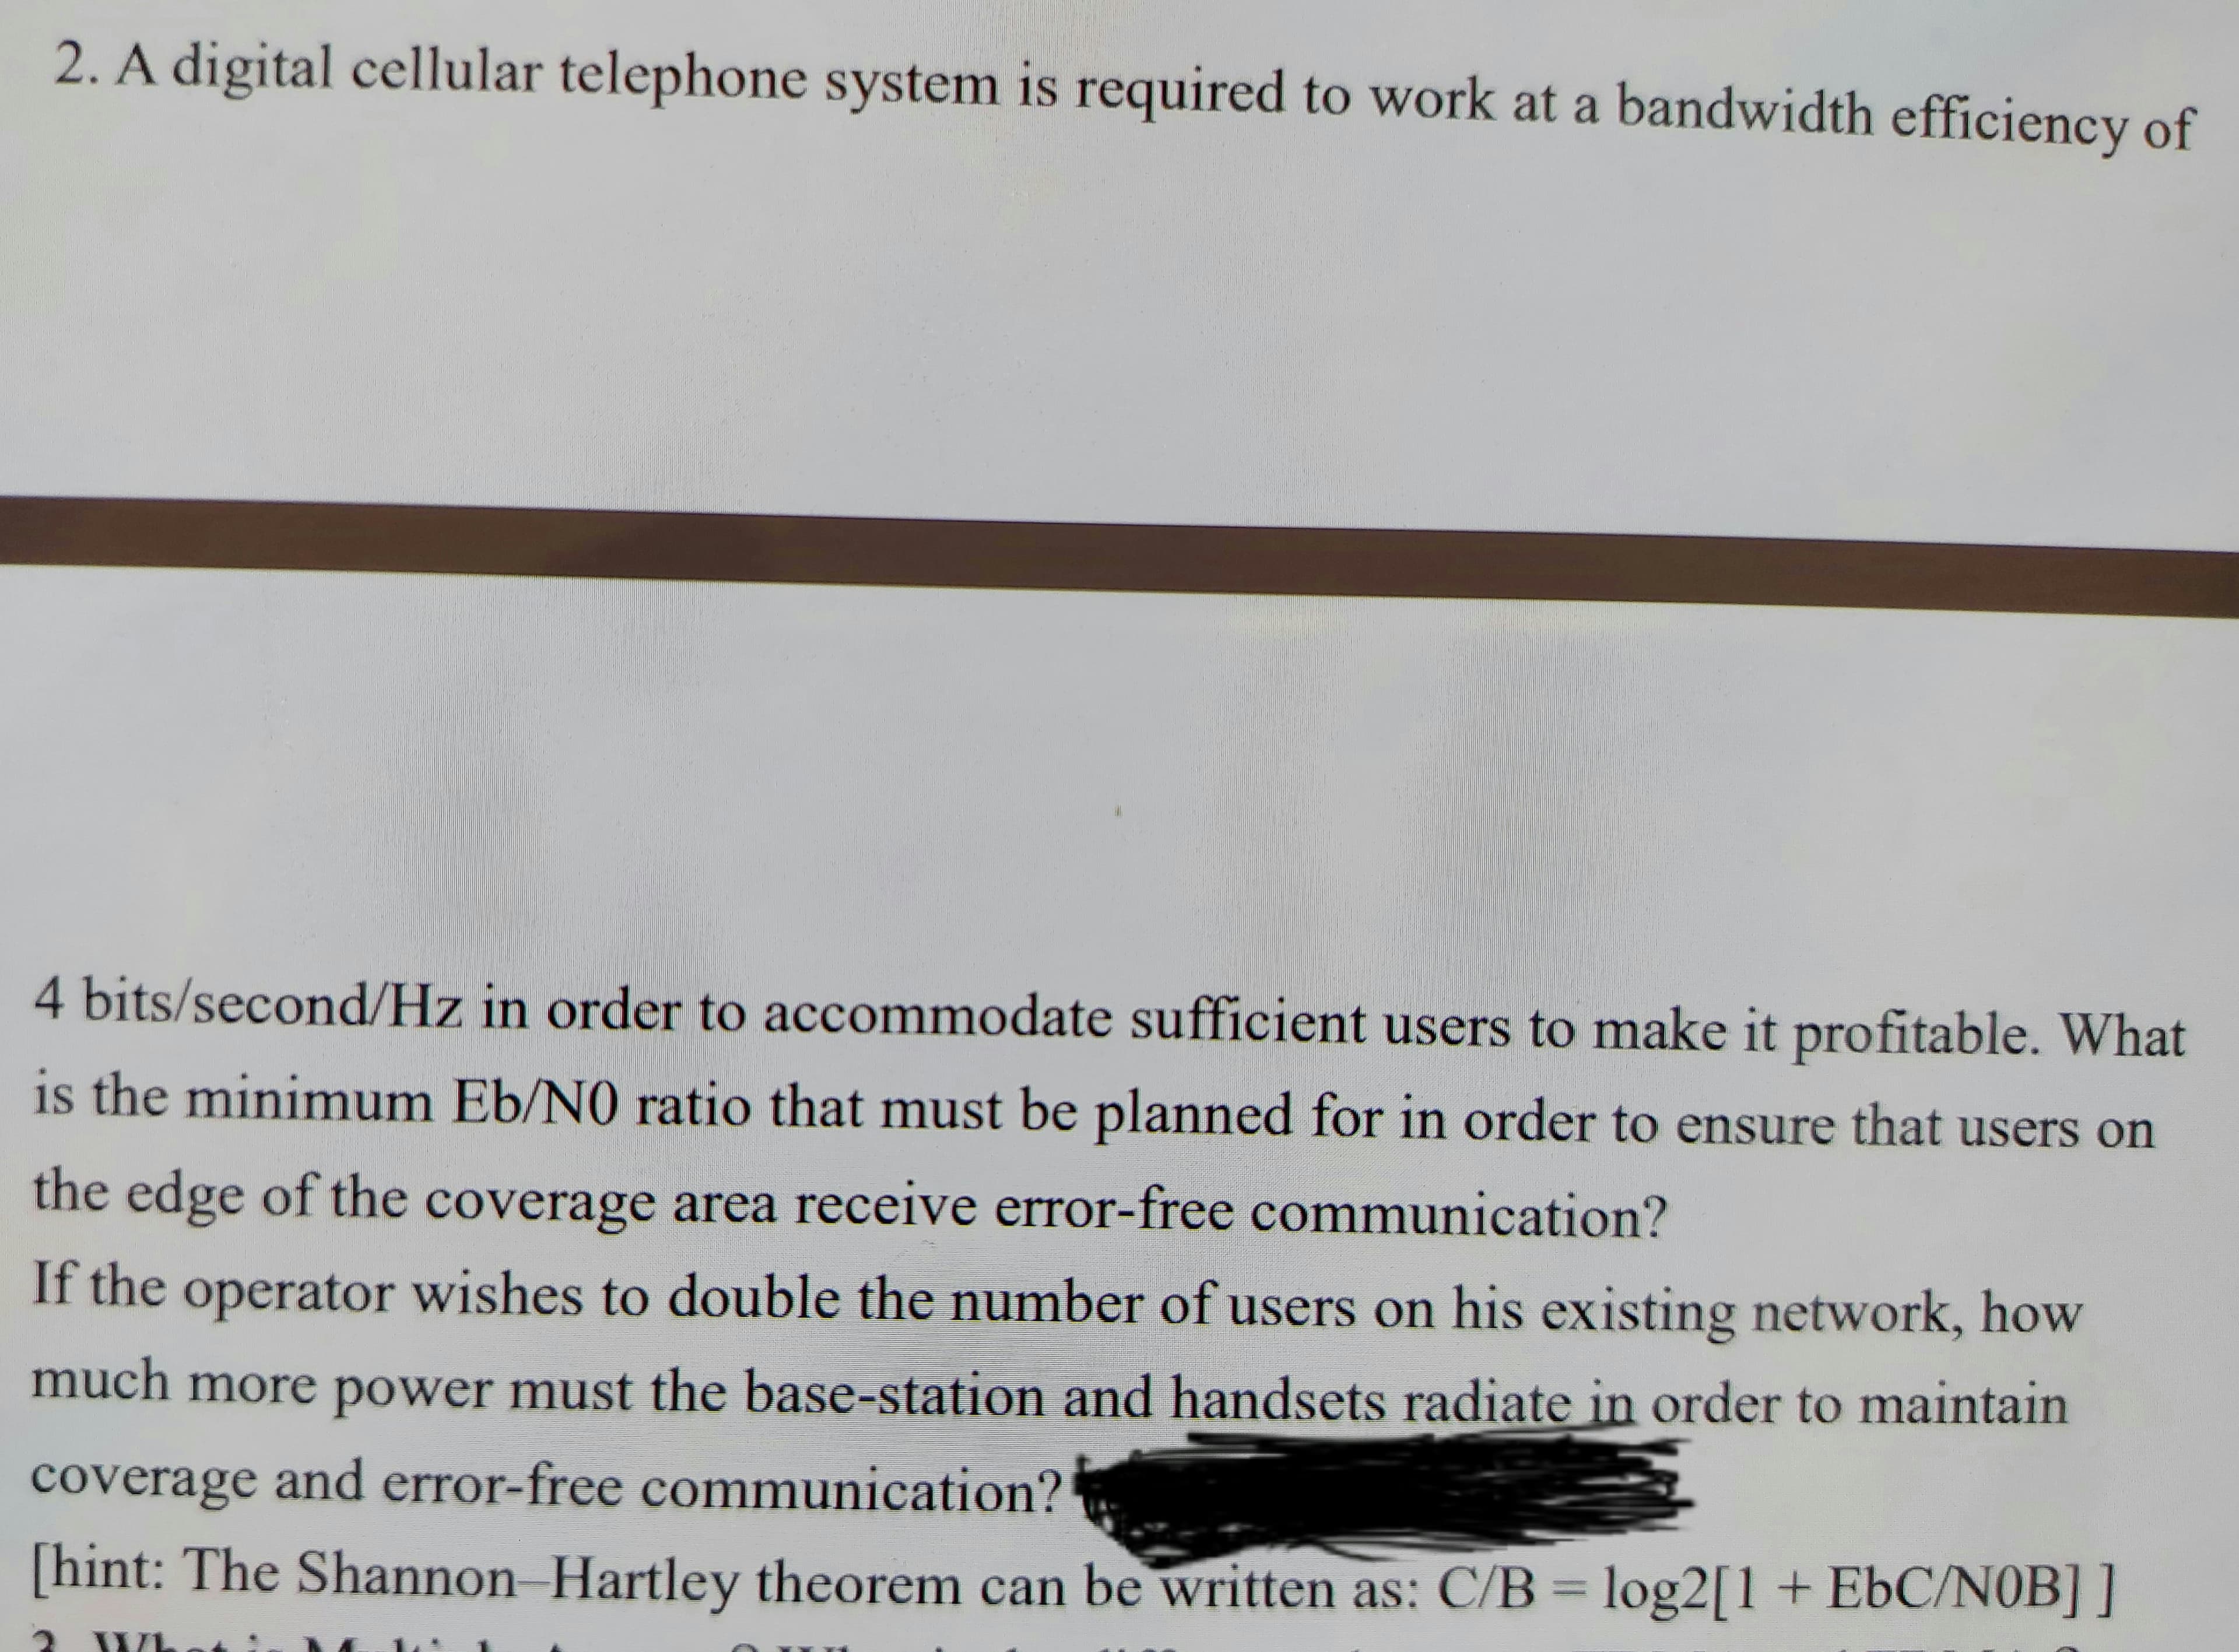 2. A digital cellular telephone system is required to work at a bandwidth efficiency of
4 bits/second/Hz in order to accommodate sufficient users to make it profitable. What
is the minimum Eb/NO ratio that must be planned for in order to ensure that users on
the edge of the coverage area receive error-free communication?
If the operator wishes to double the number of users on his existing network, how
much more power must the base-station and handsets radiate in order to maintain
coverage and error-free communication?
[hint: The Shannon Hartley theorem can be written as: C/B = log2[1 + EbC/NOB] ]
%3D
